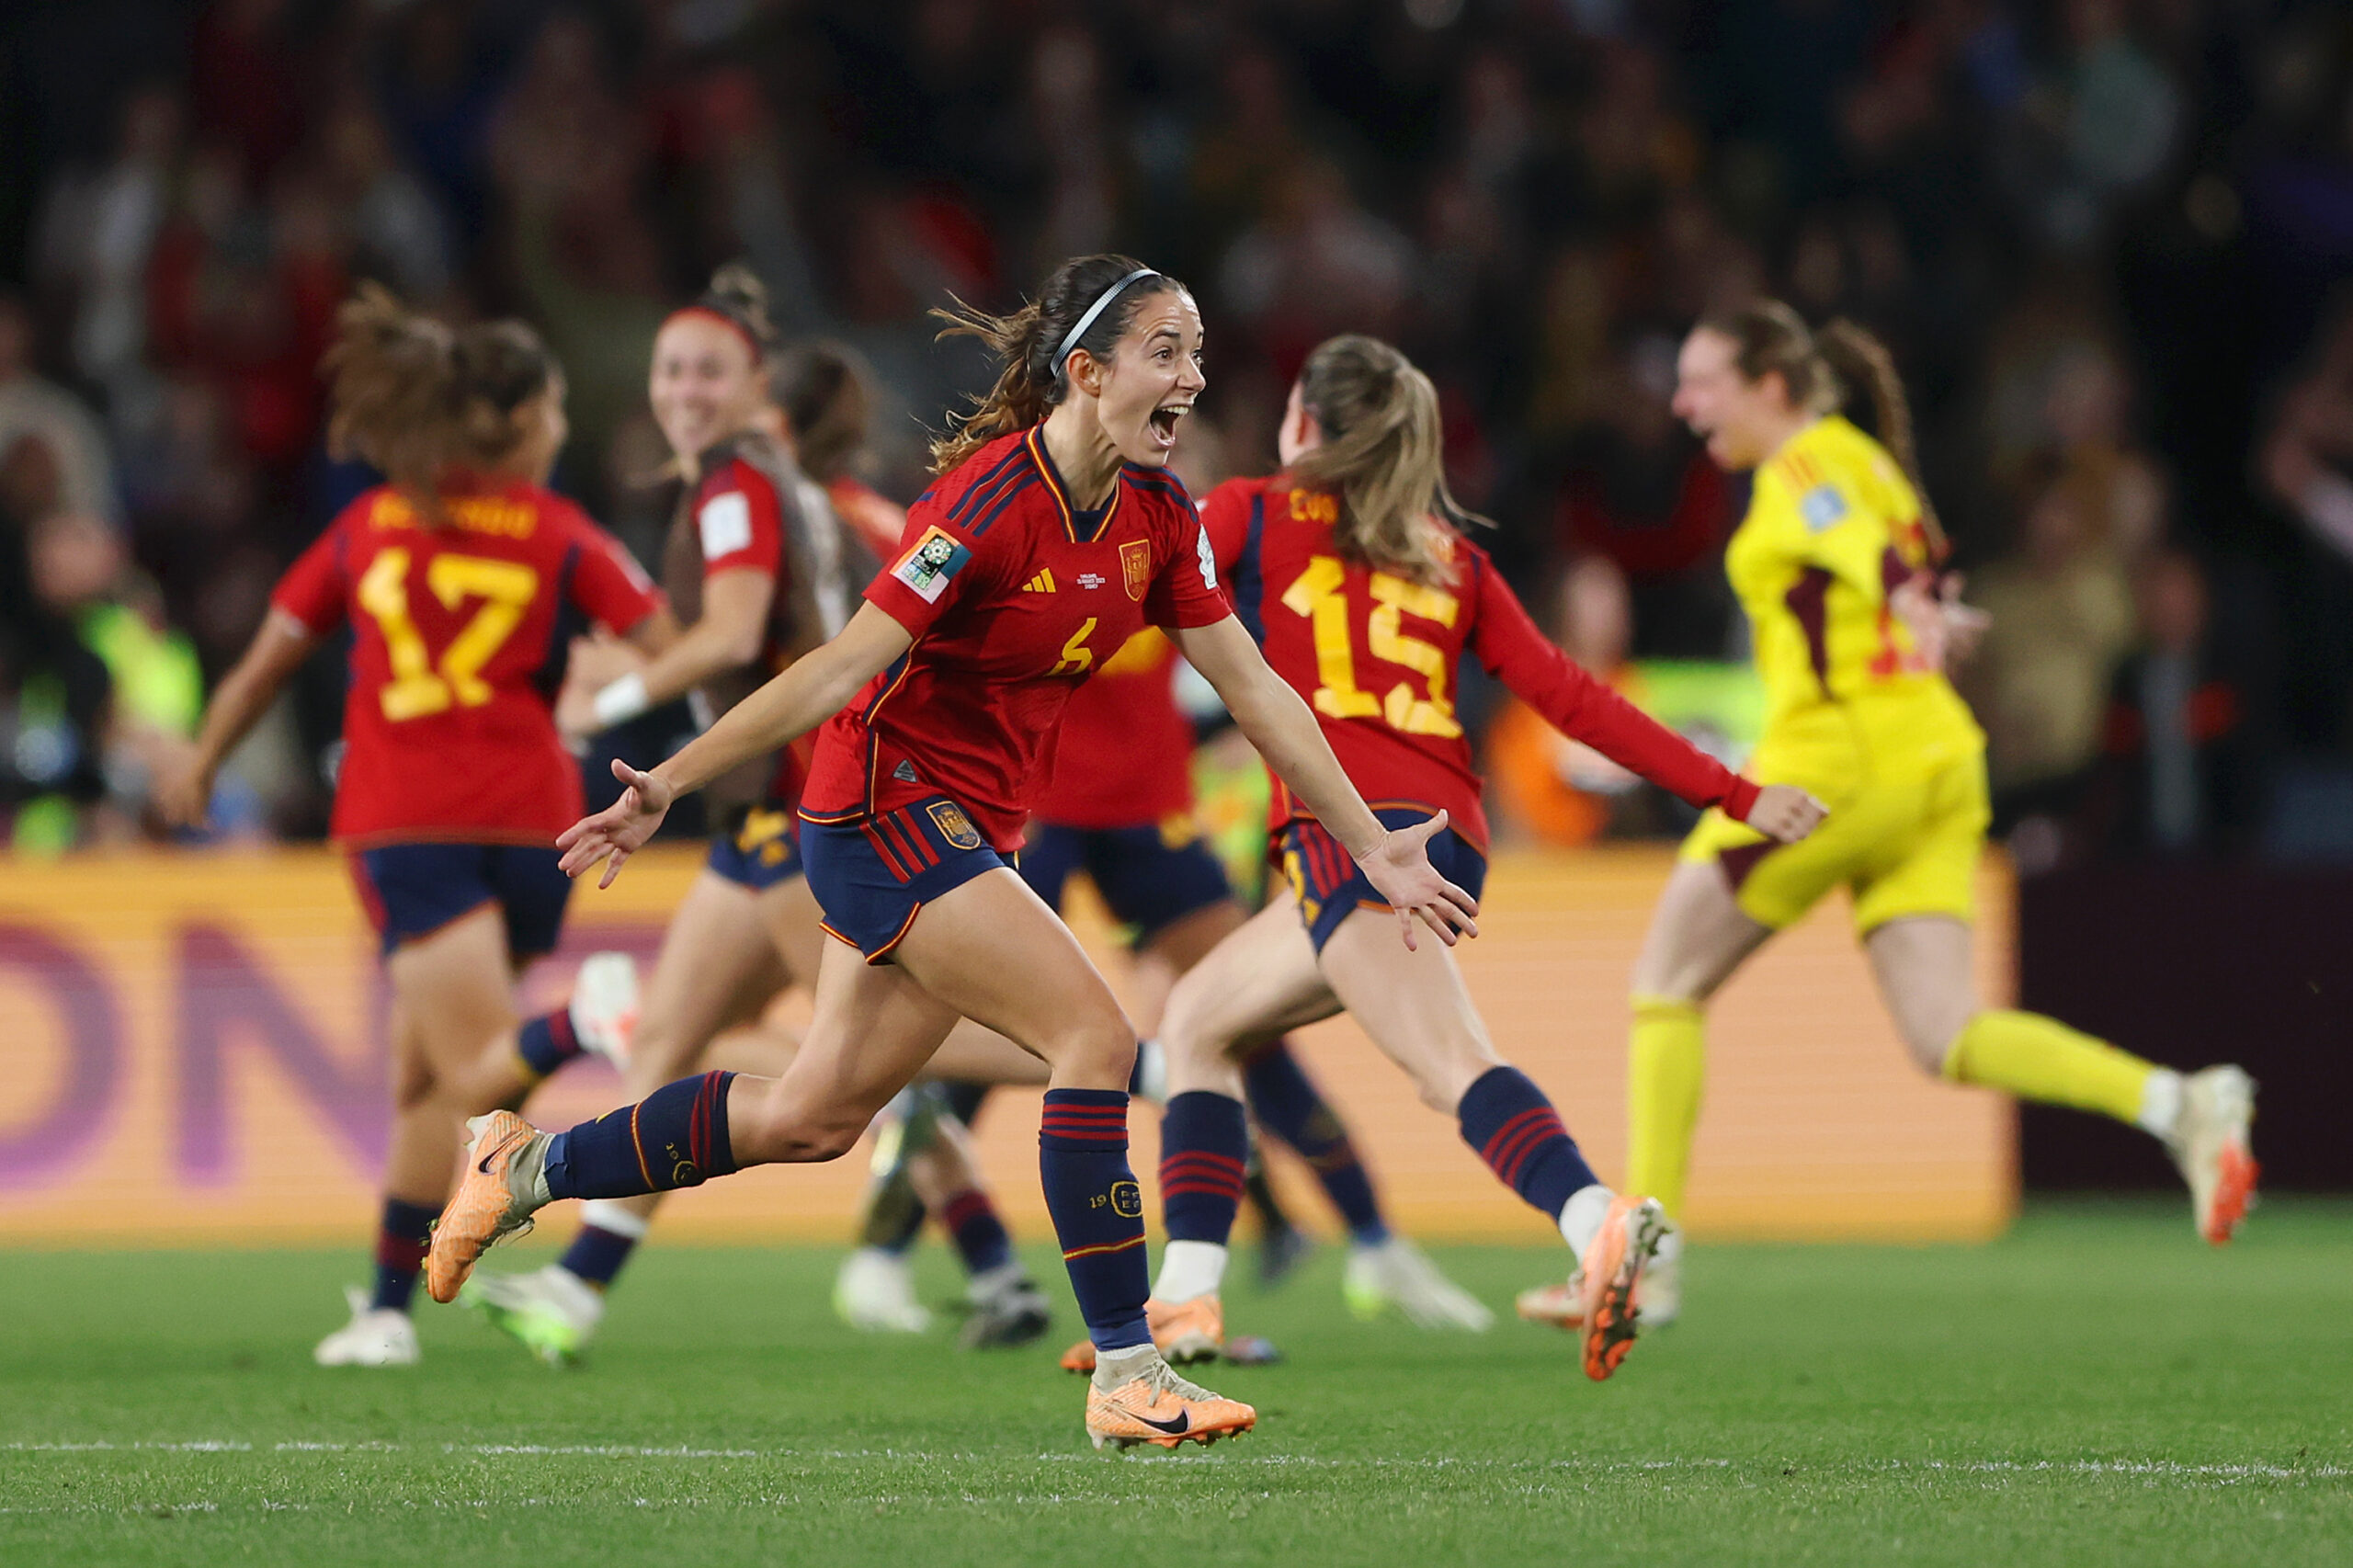 Aitana Bonmatí is celebrating the victory at the World Cup with Spain national team